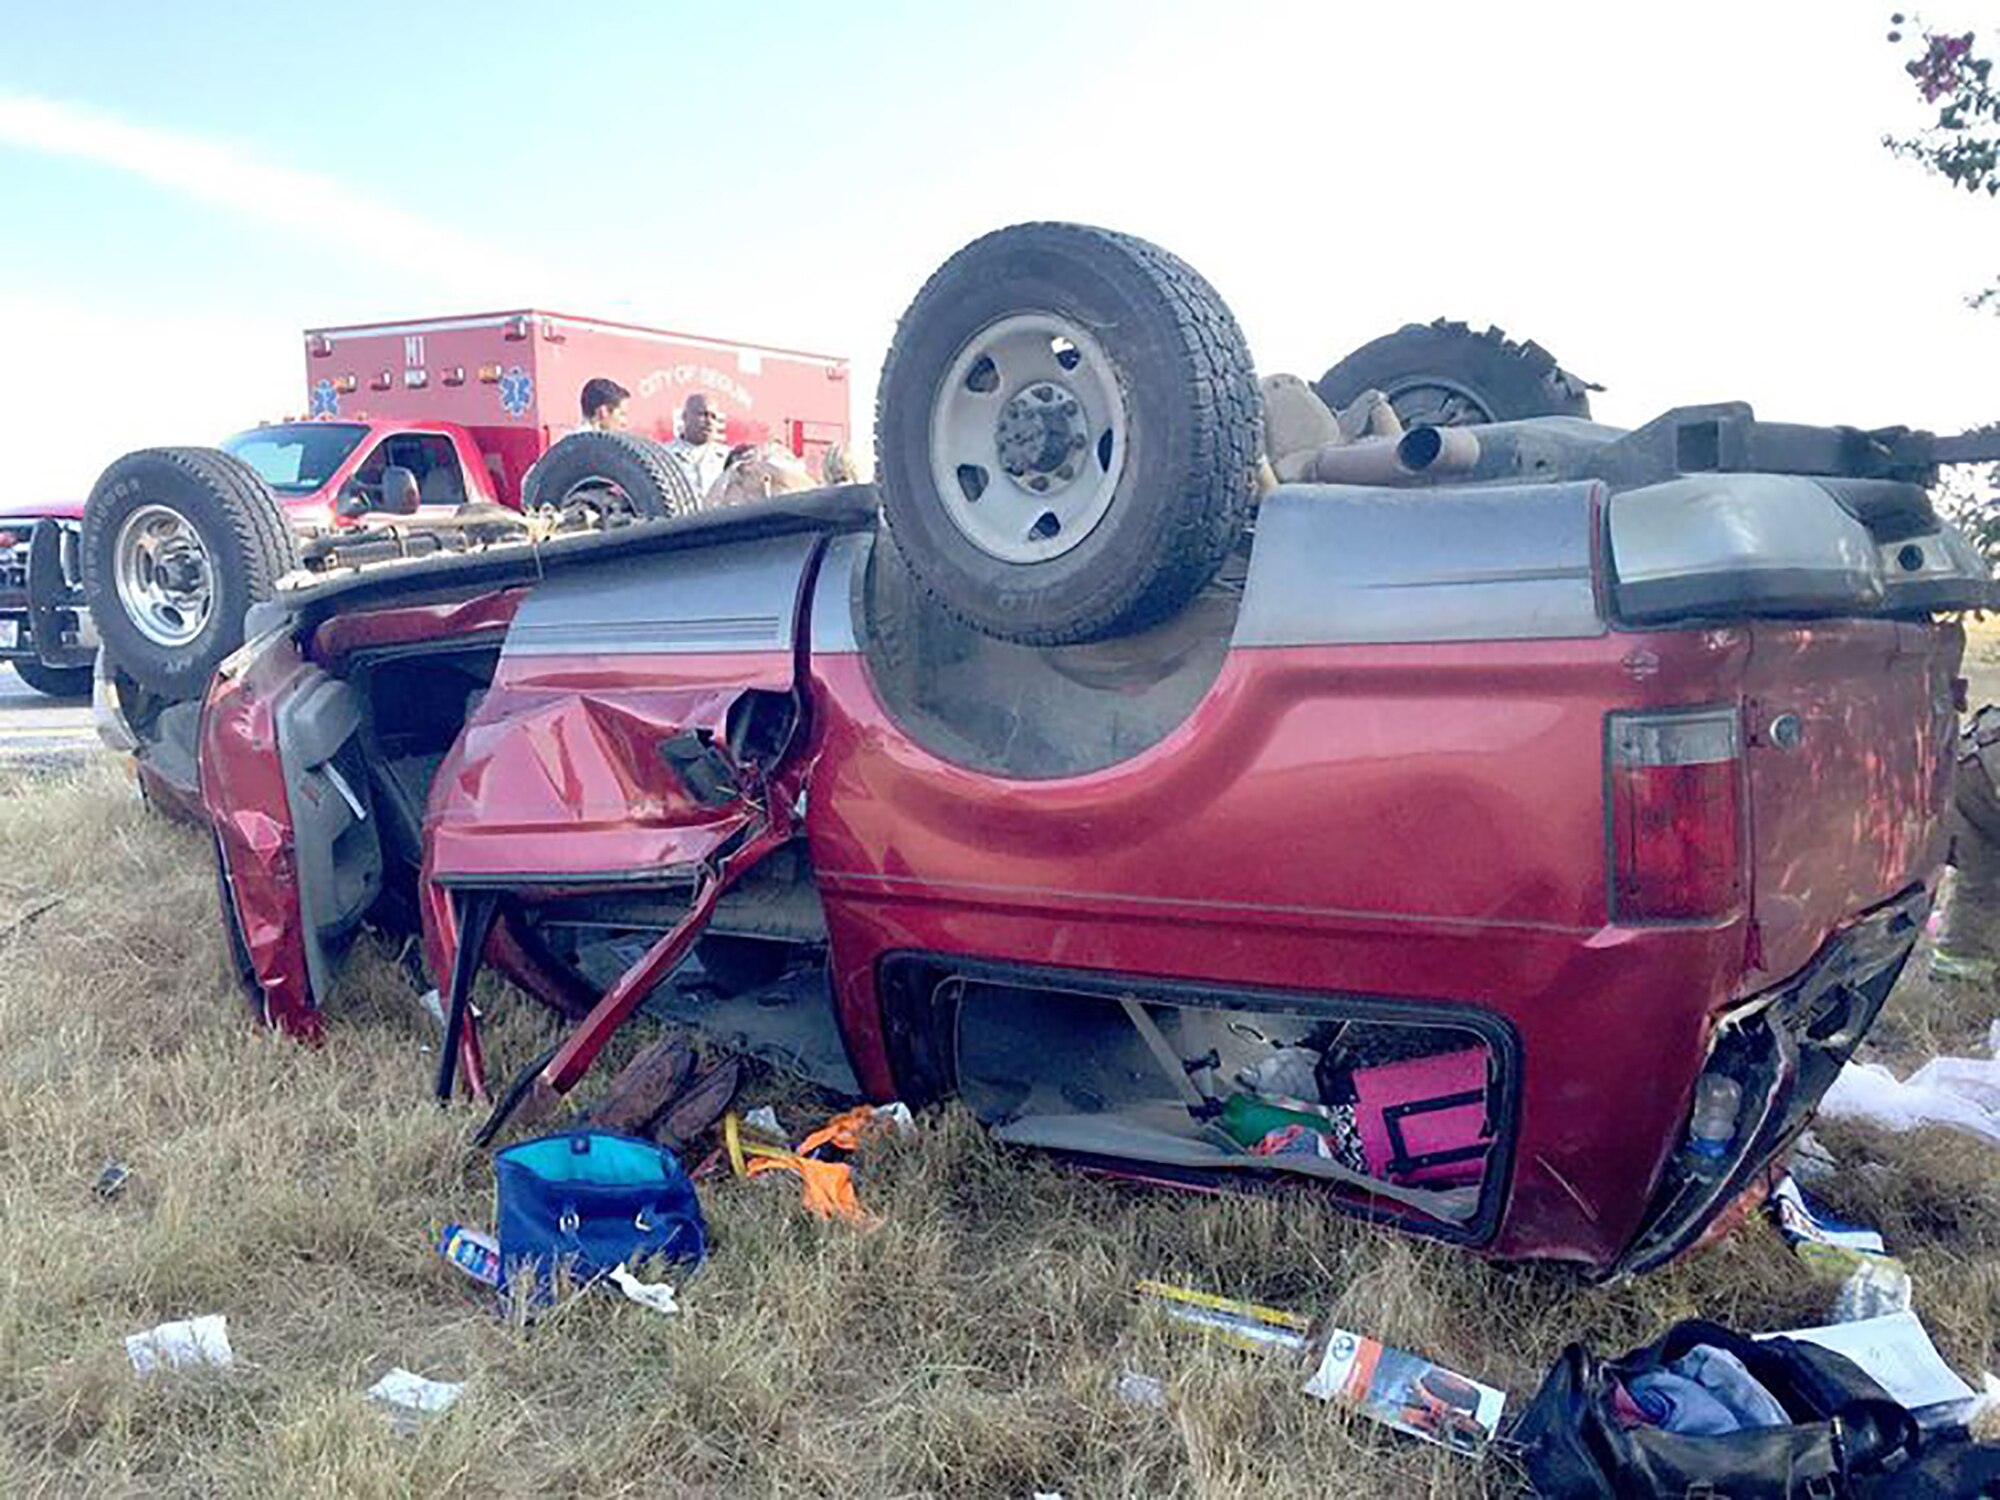 An overturned Ford Excursion rests in the median after rolling over, seriously injuring all six passengers on August 16, 2015 near Interstate 10 East. Four 433rd Airlift Wing Airmen stopped and provided immediate care to the injured passengers until first responders arrived on scene. (Courtesy photo/Seguin Gazette)